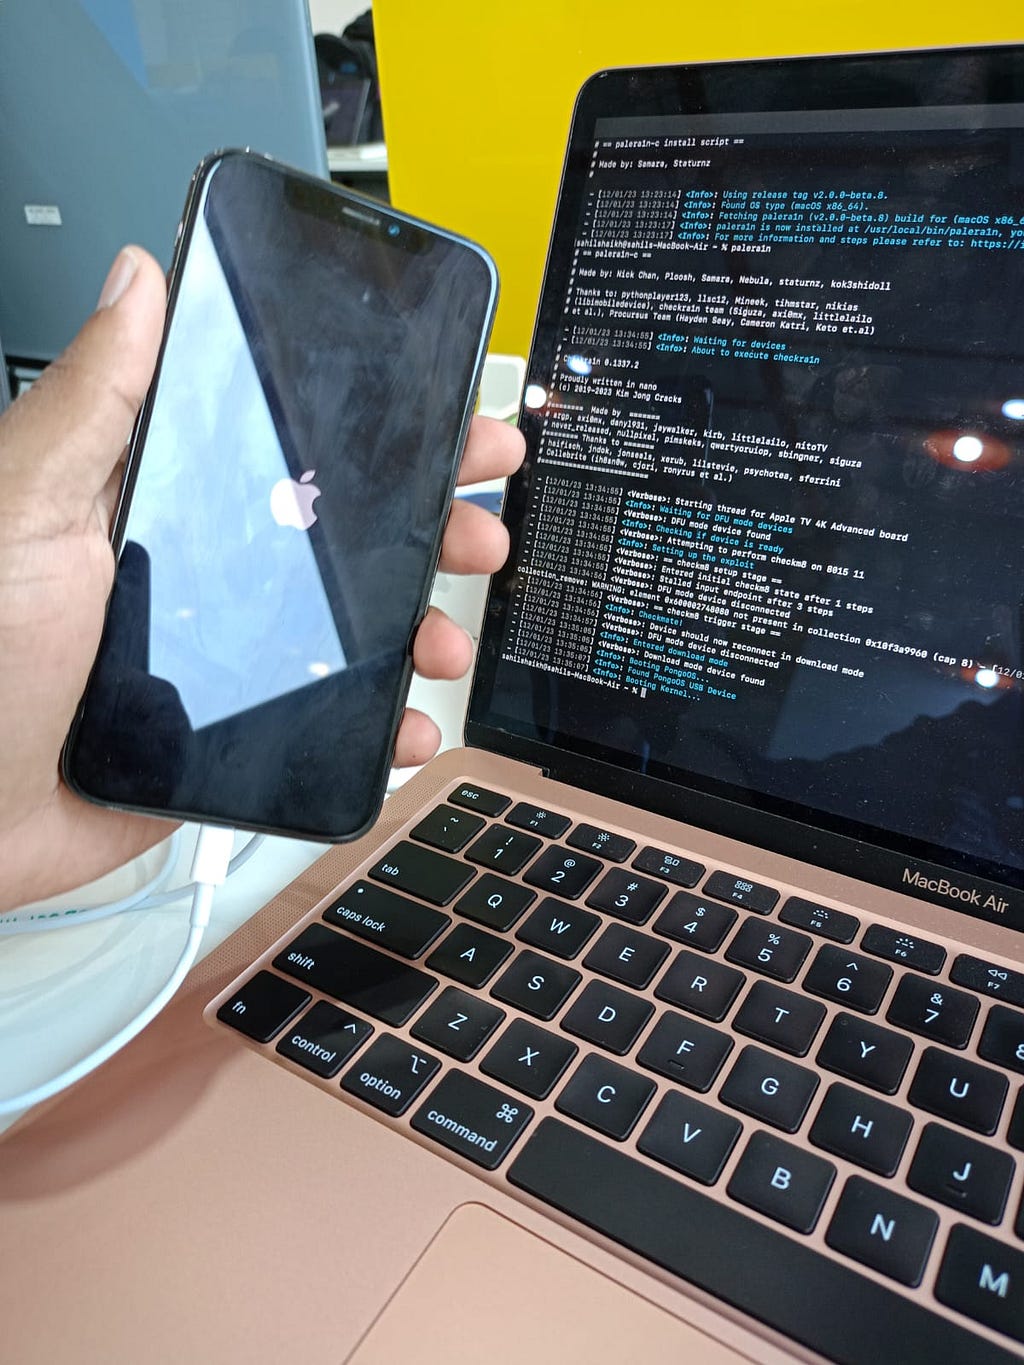 IOS Pentesting, Blog, Cyber Security, Ethical Hacking, Pentesting